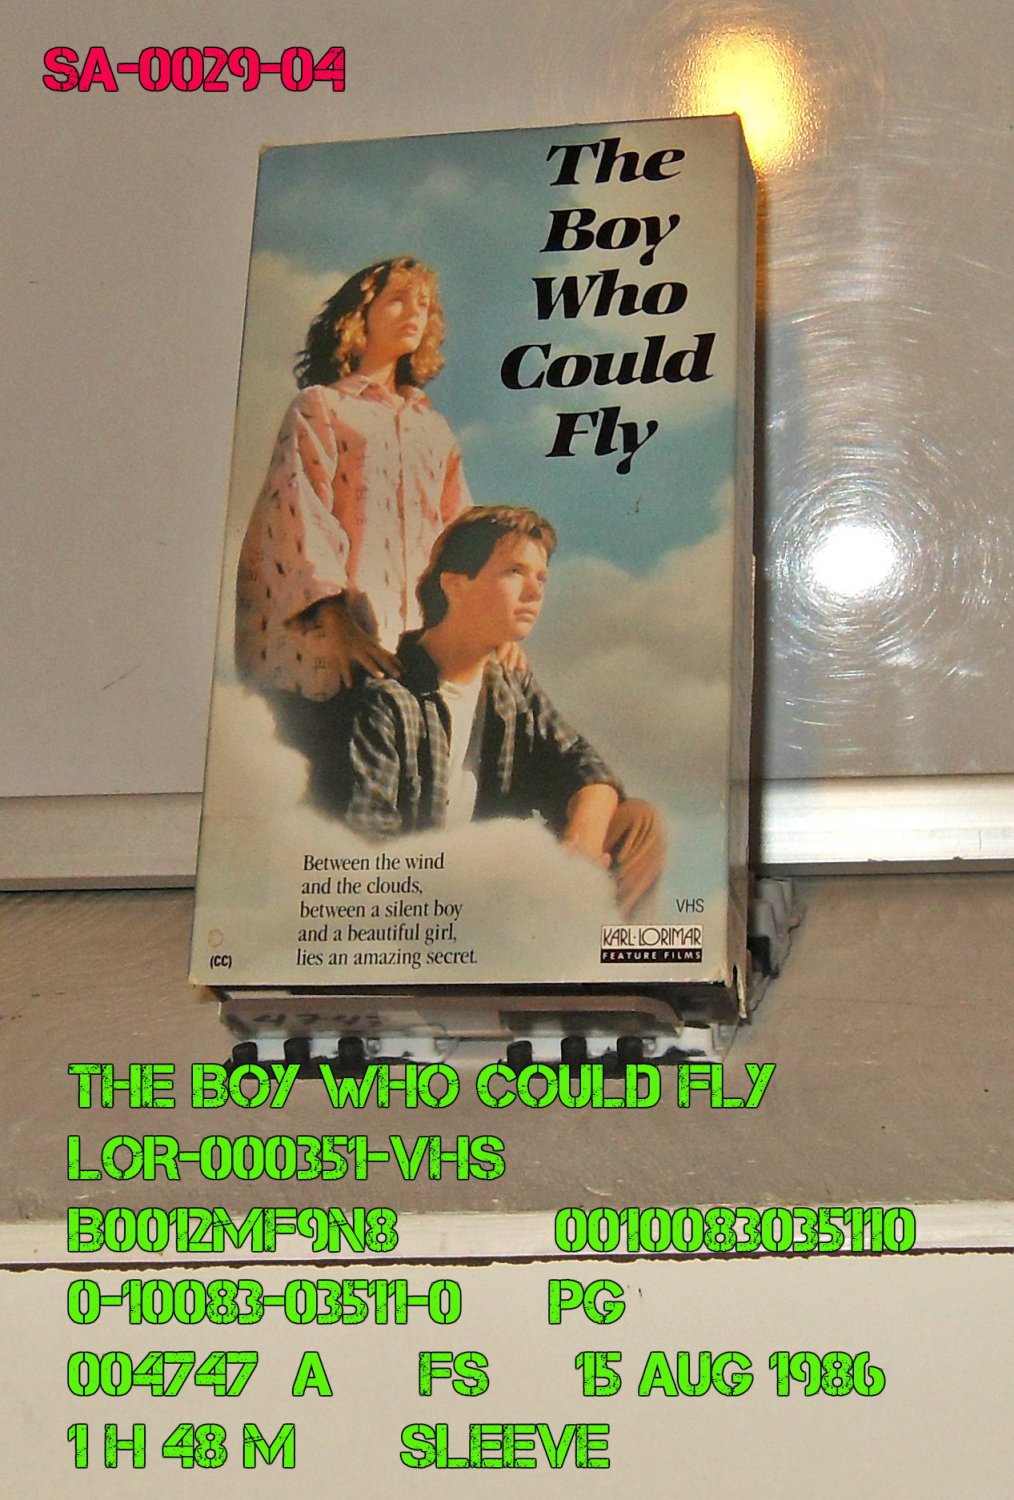 VHS - BOY WHO COULD FLY, THE